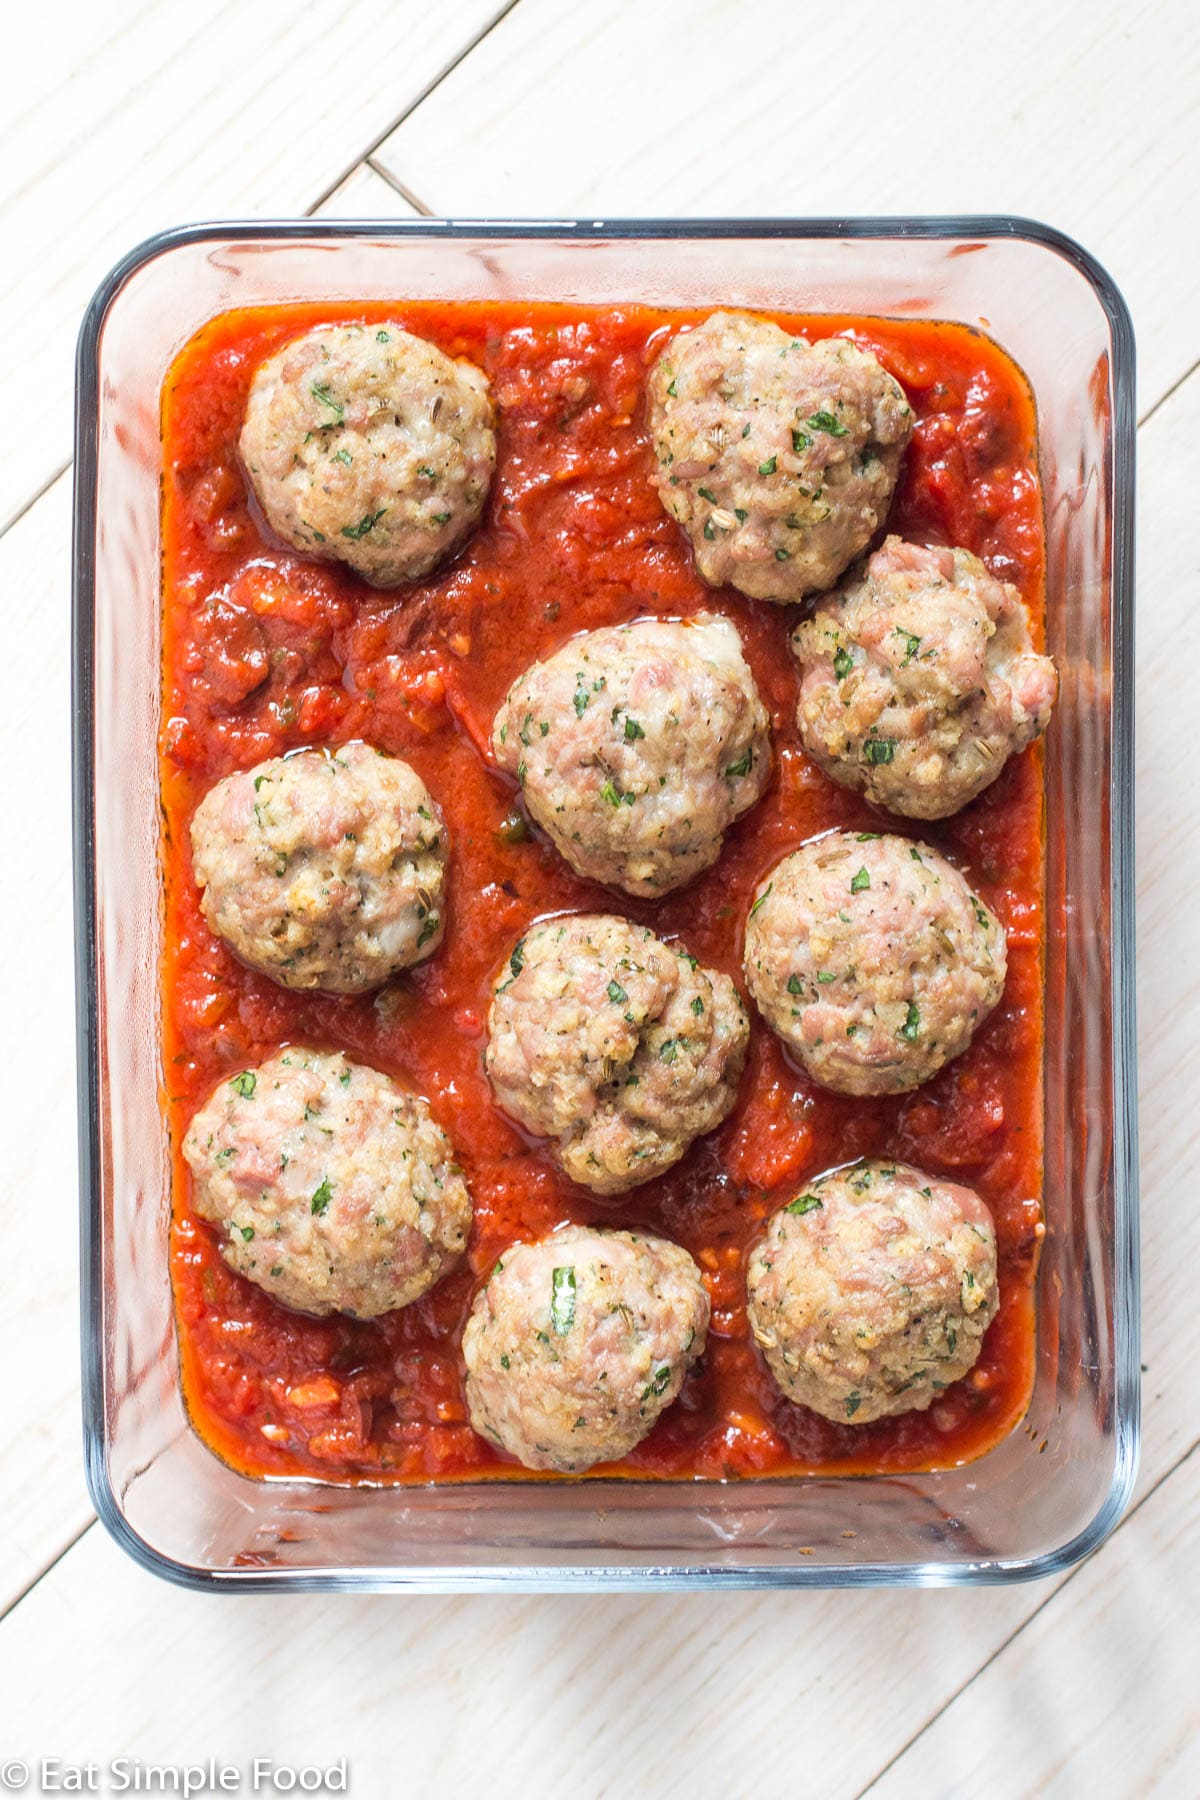 Glass pyrex rectangle dish with a red tomato sauce with 10 meatballs sitting on the sauce.